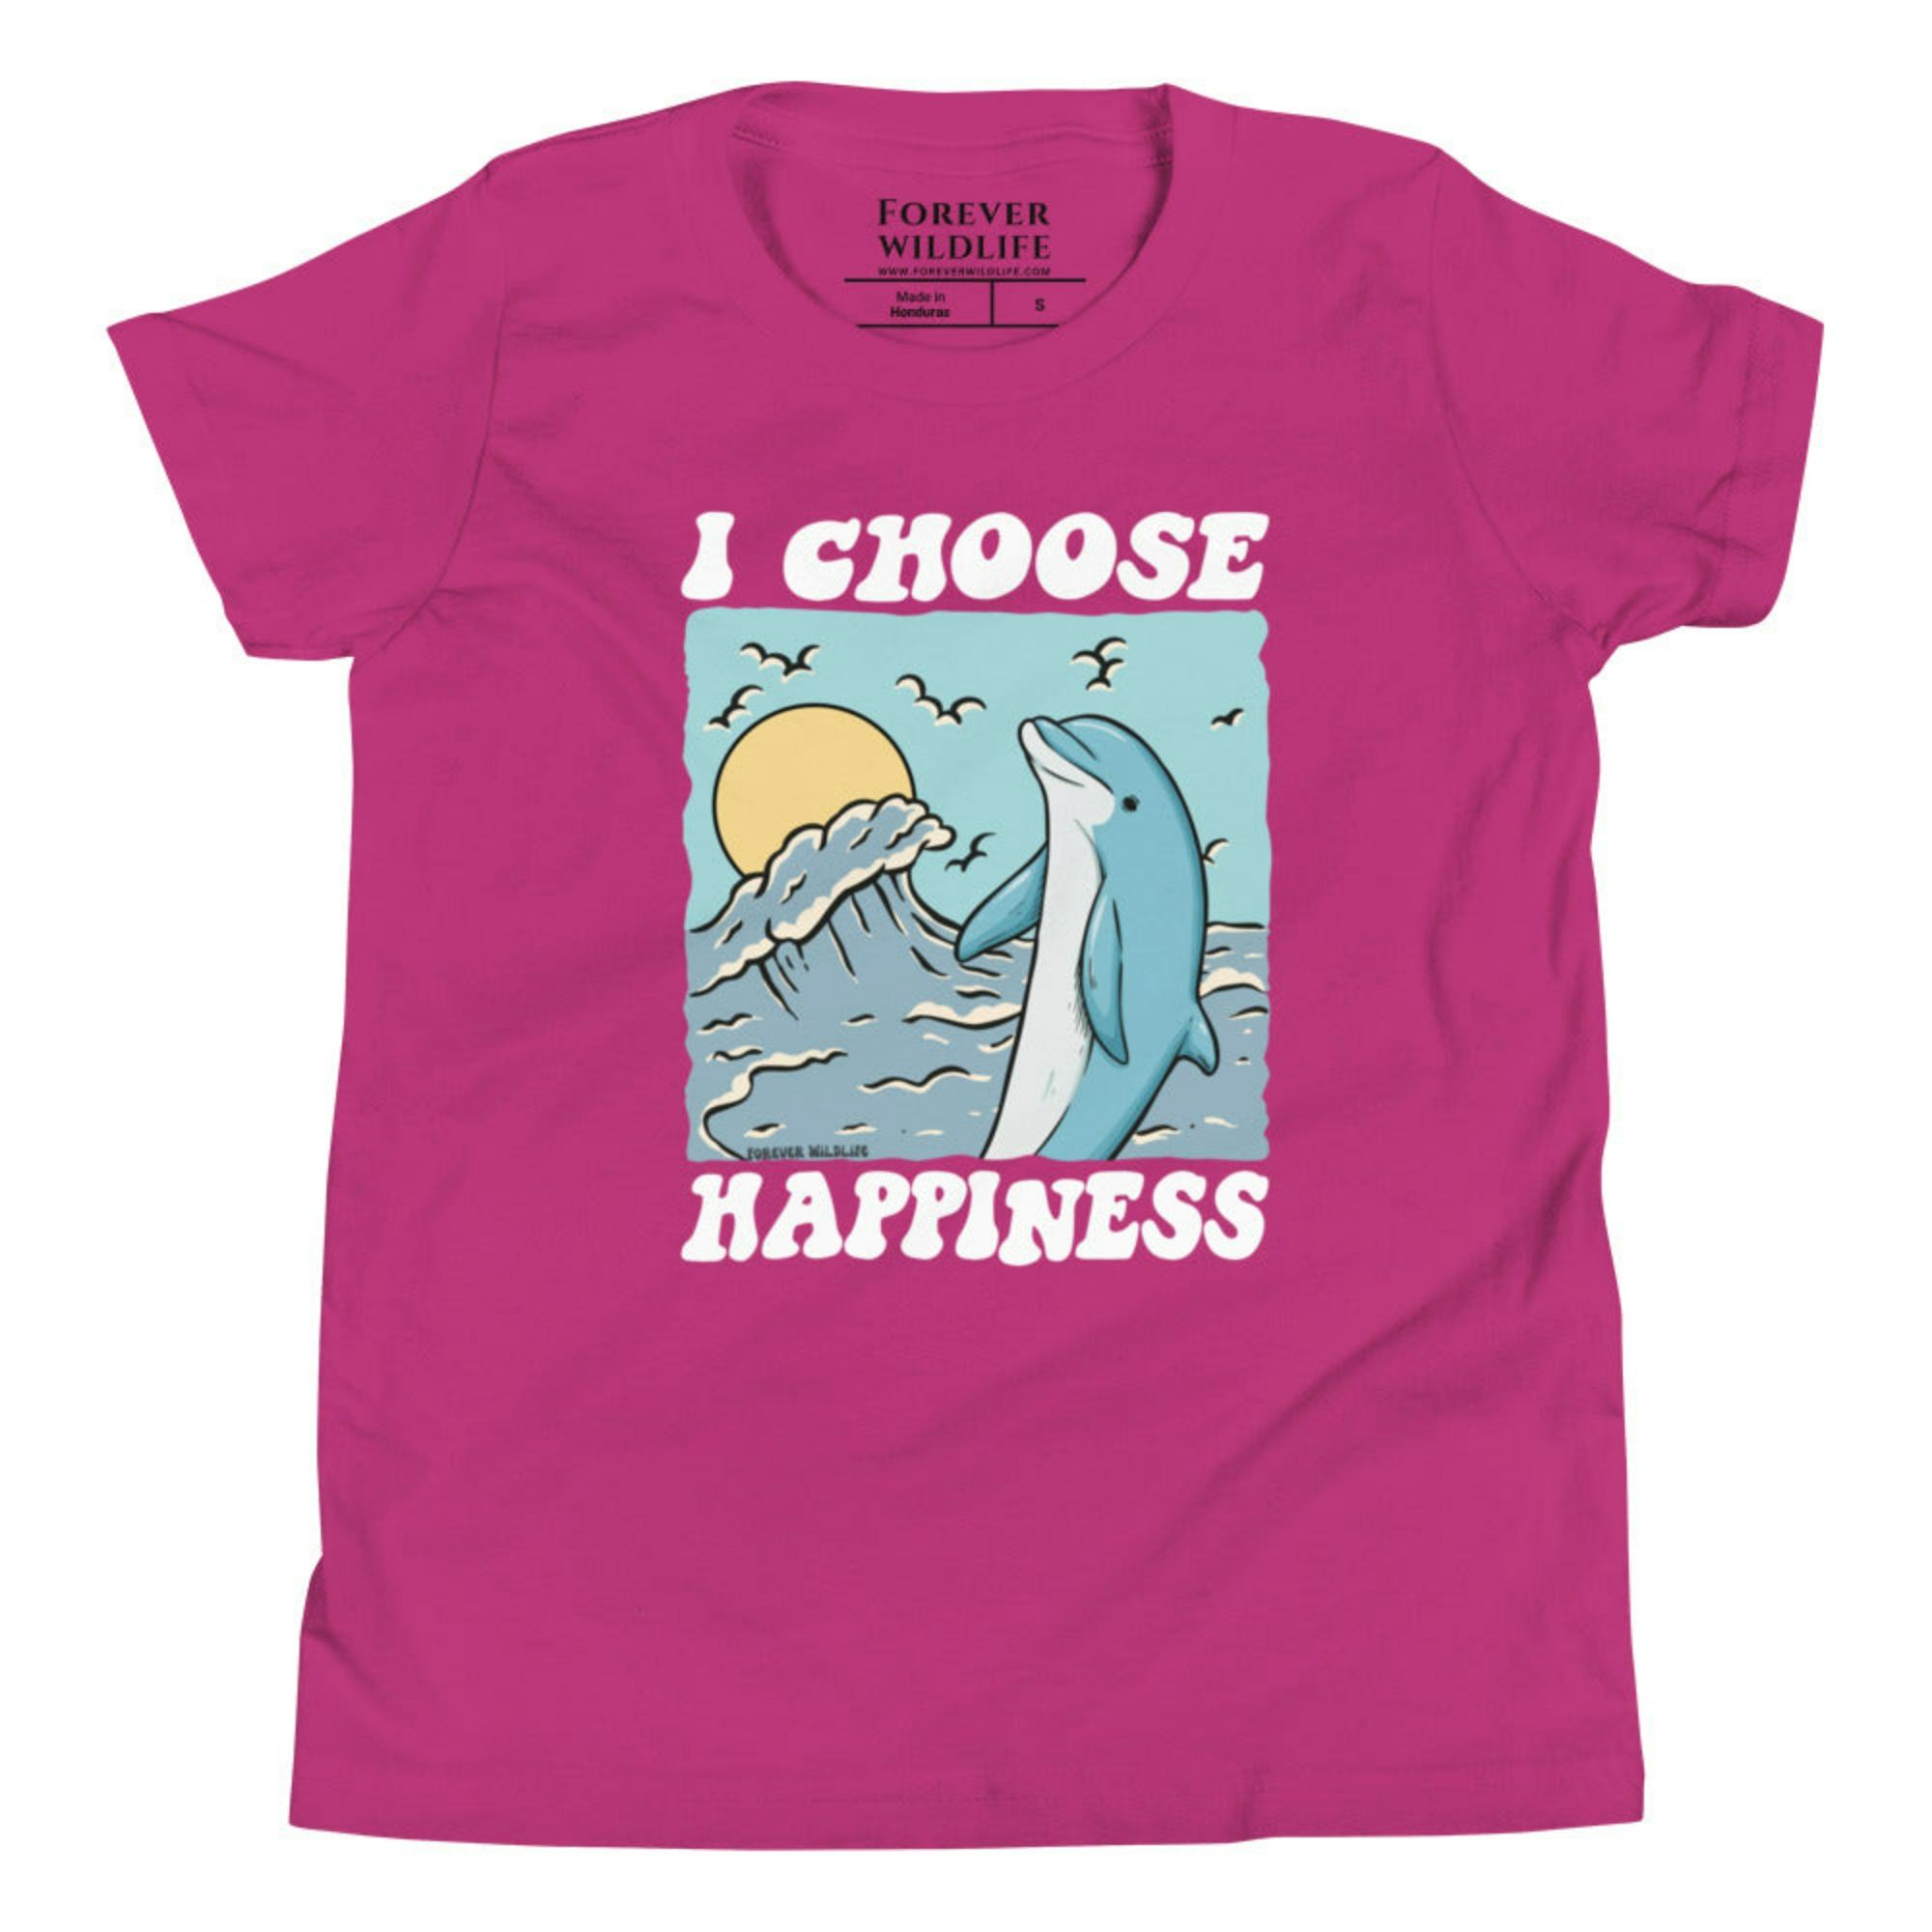 Berry Dolphin Youth T-Shirt with dolphin graphic as part of Wildlife T-Shirts, Wildlife Clothing & Apparel by Forever Wildlife